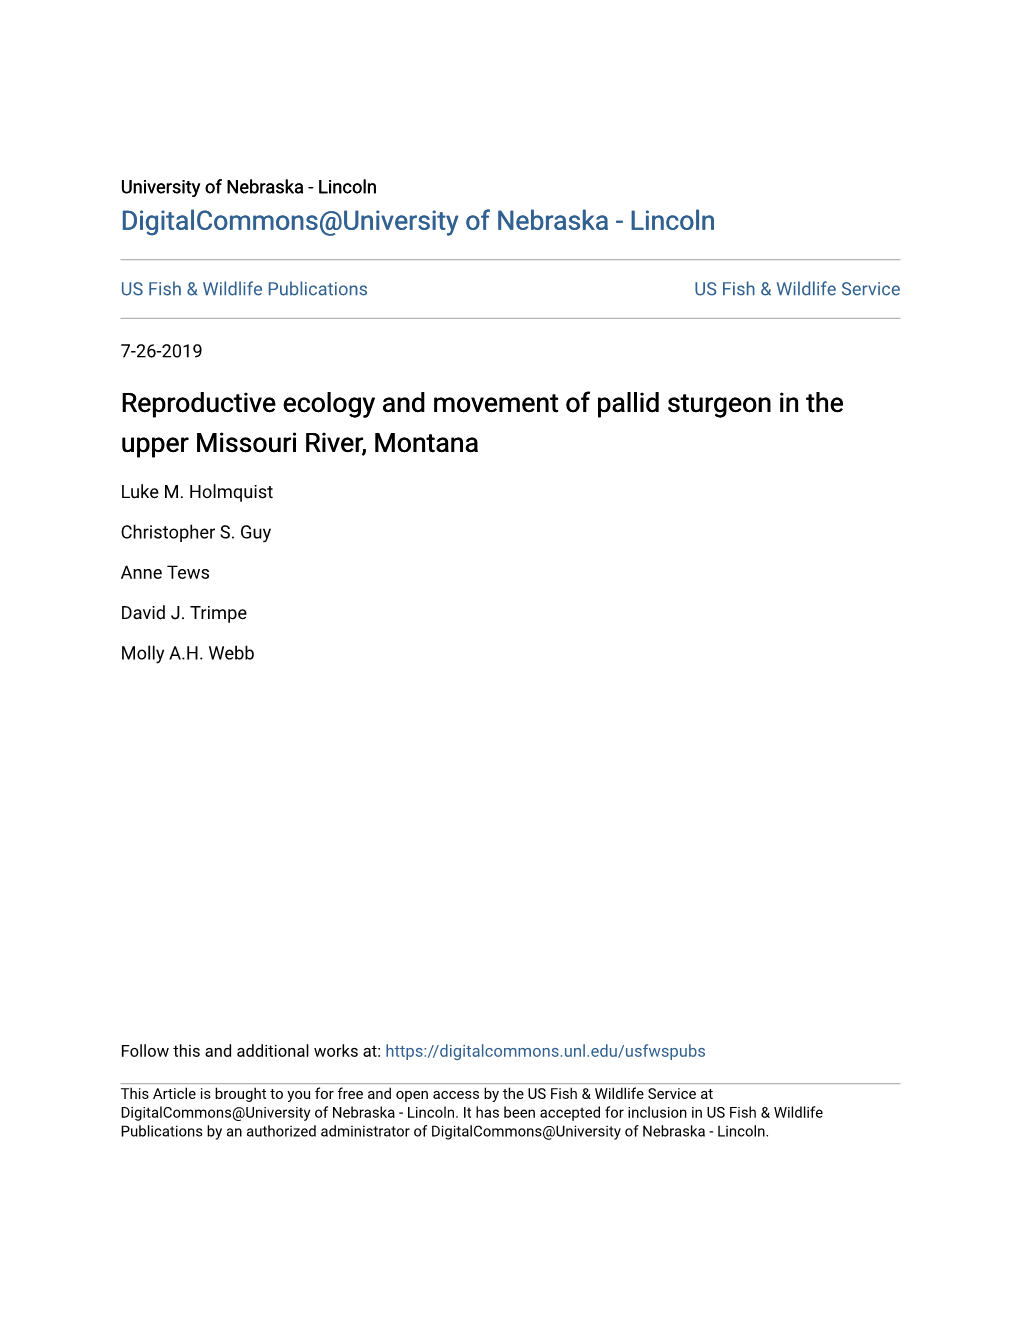 Reproductive Ecology and Movement of Pallid Sturgeon in the Upper Missouri River, Montana